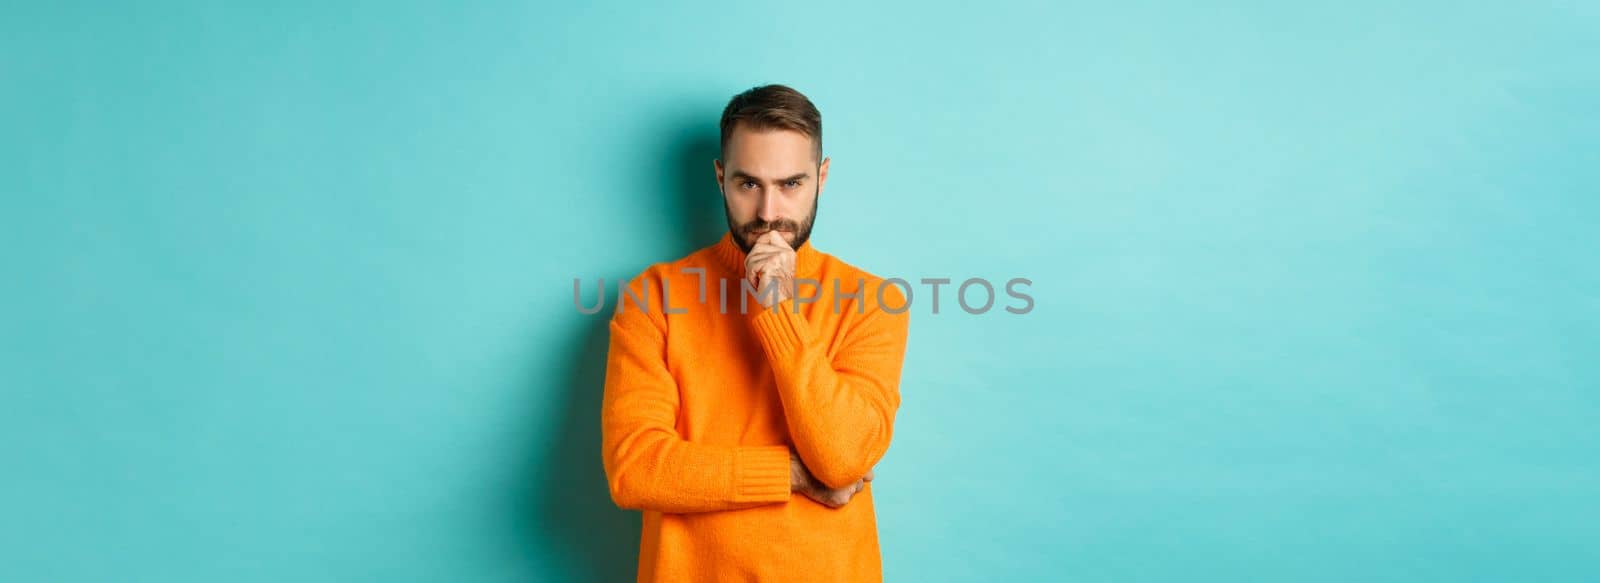 Thougtful young man making decision, looking serious and thinking, choosing, standing near copy space turquoise background.